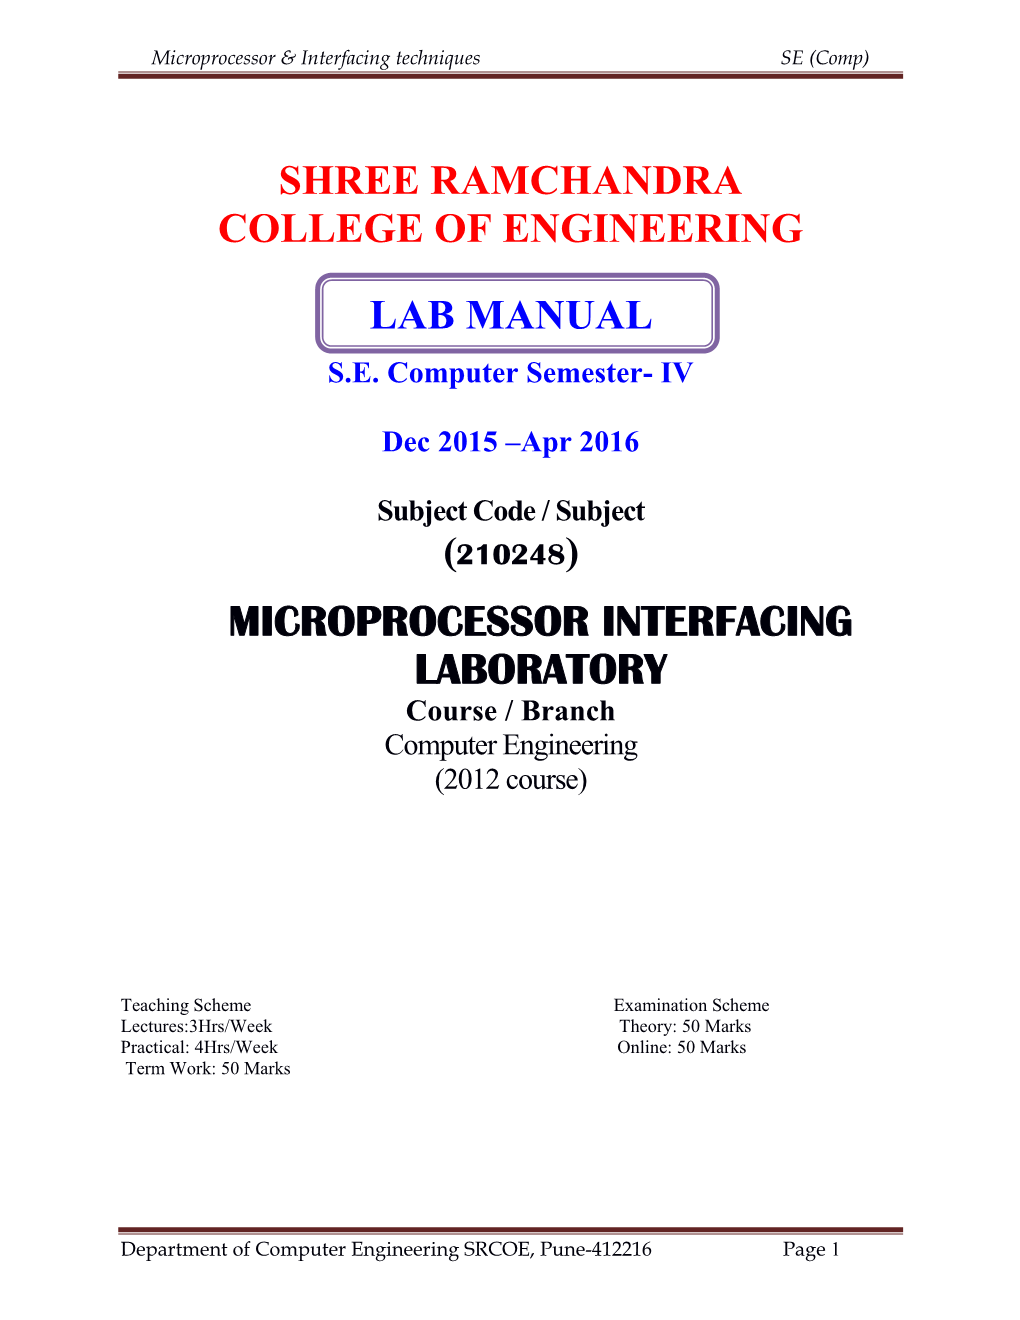 MICROPROCESSOR INTERFACING LABORATORY Course / Branch Computer Engineering (2012 Course)